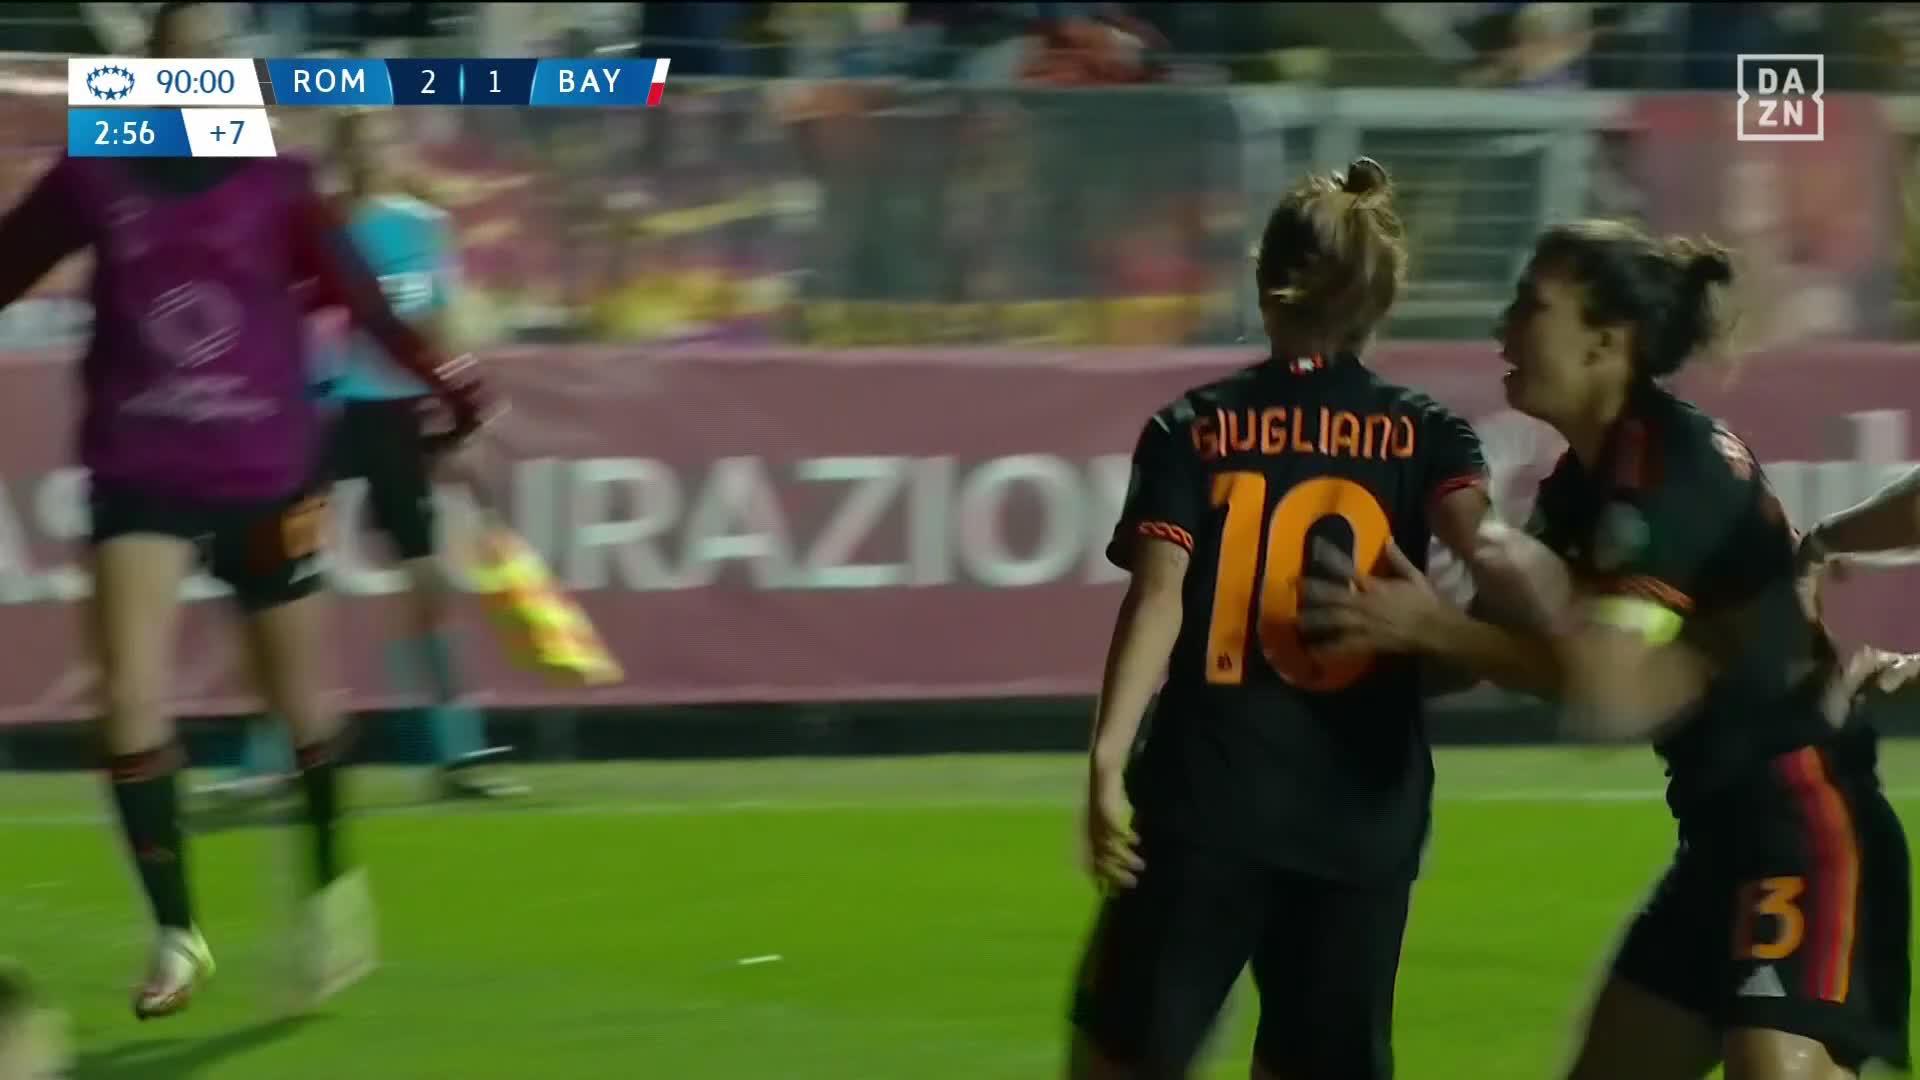 ROMA GO AHEAD!! 😮Manuela Giugliano scores right at the death ☄️Watch LIVE 📺  highlights on YouTube 👉  #NewDealforWomensFootball